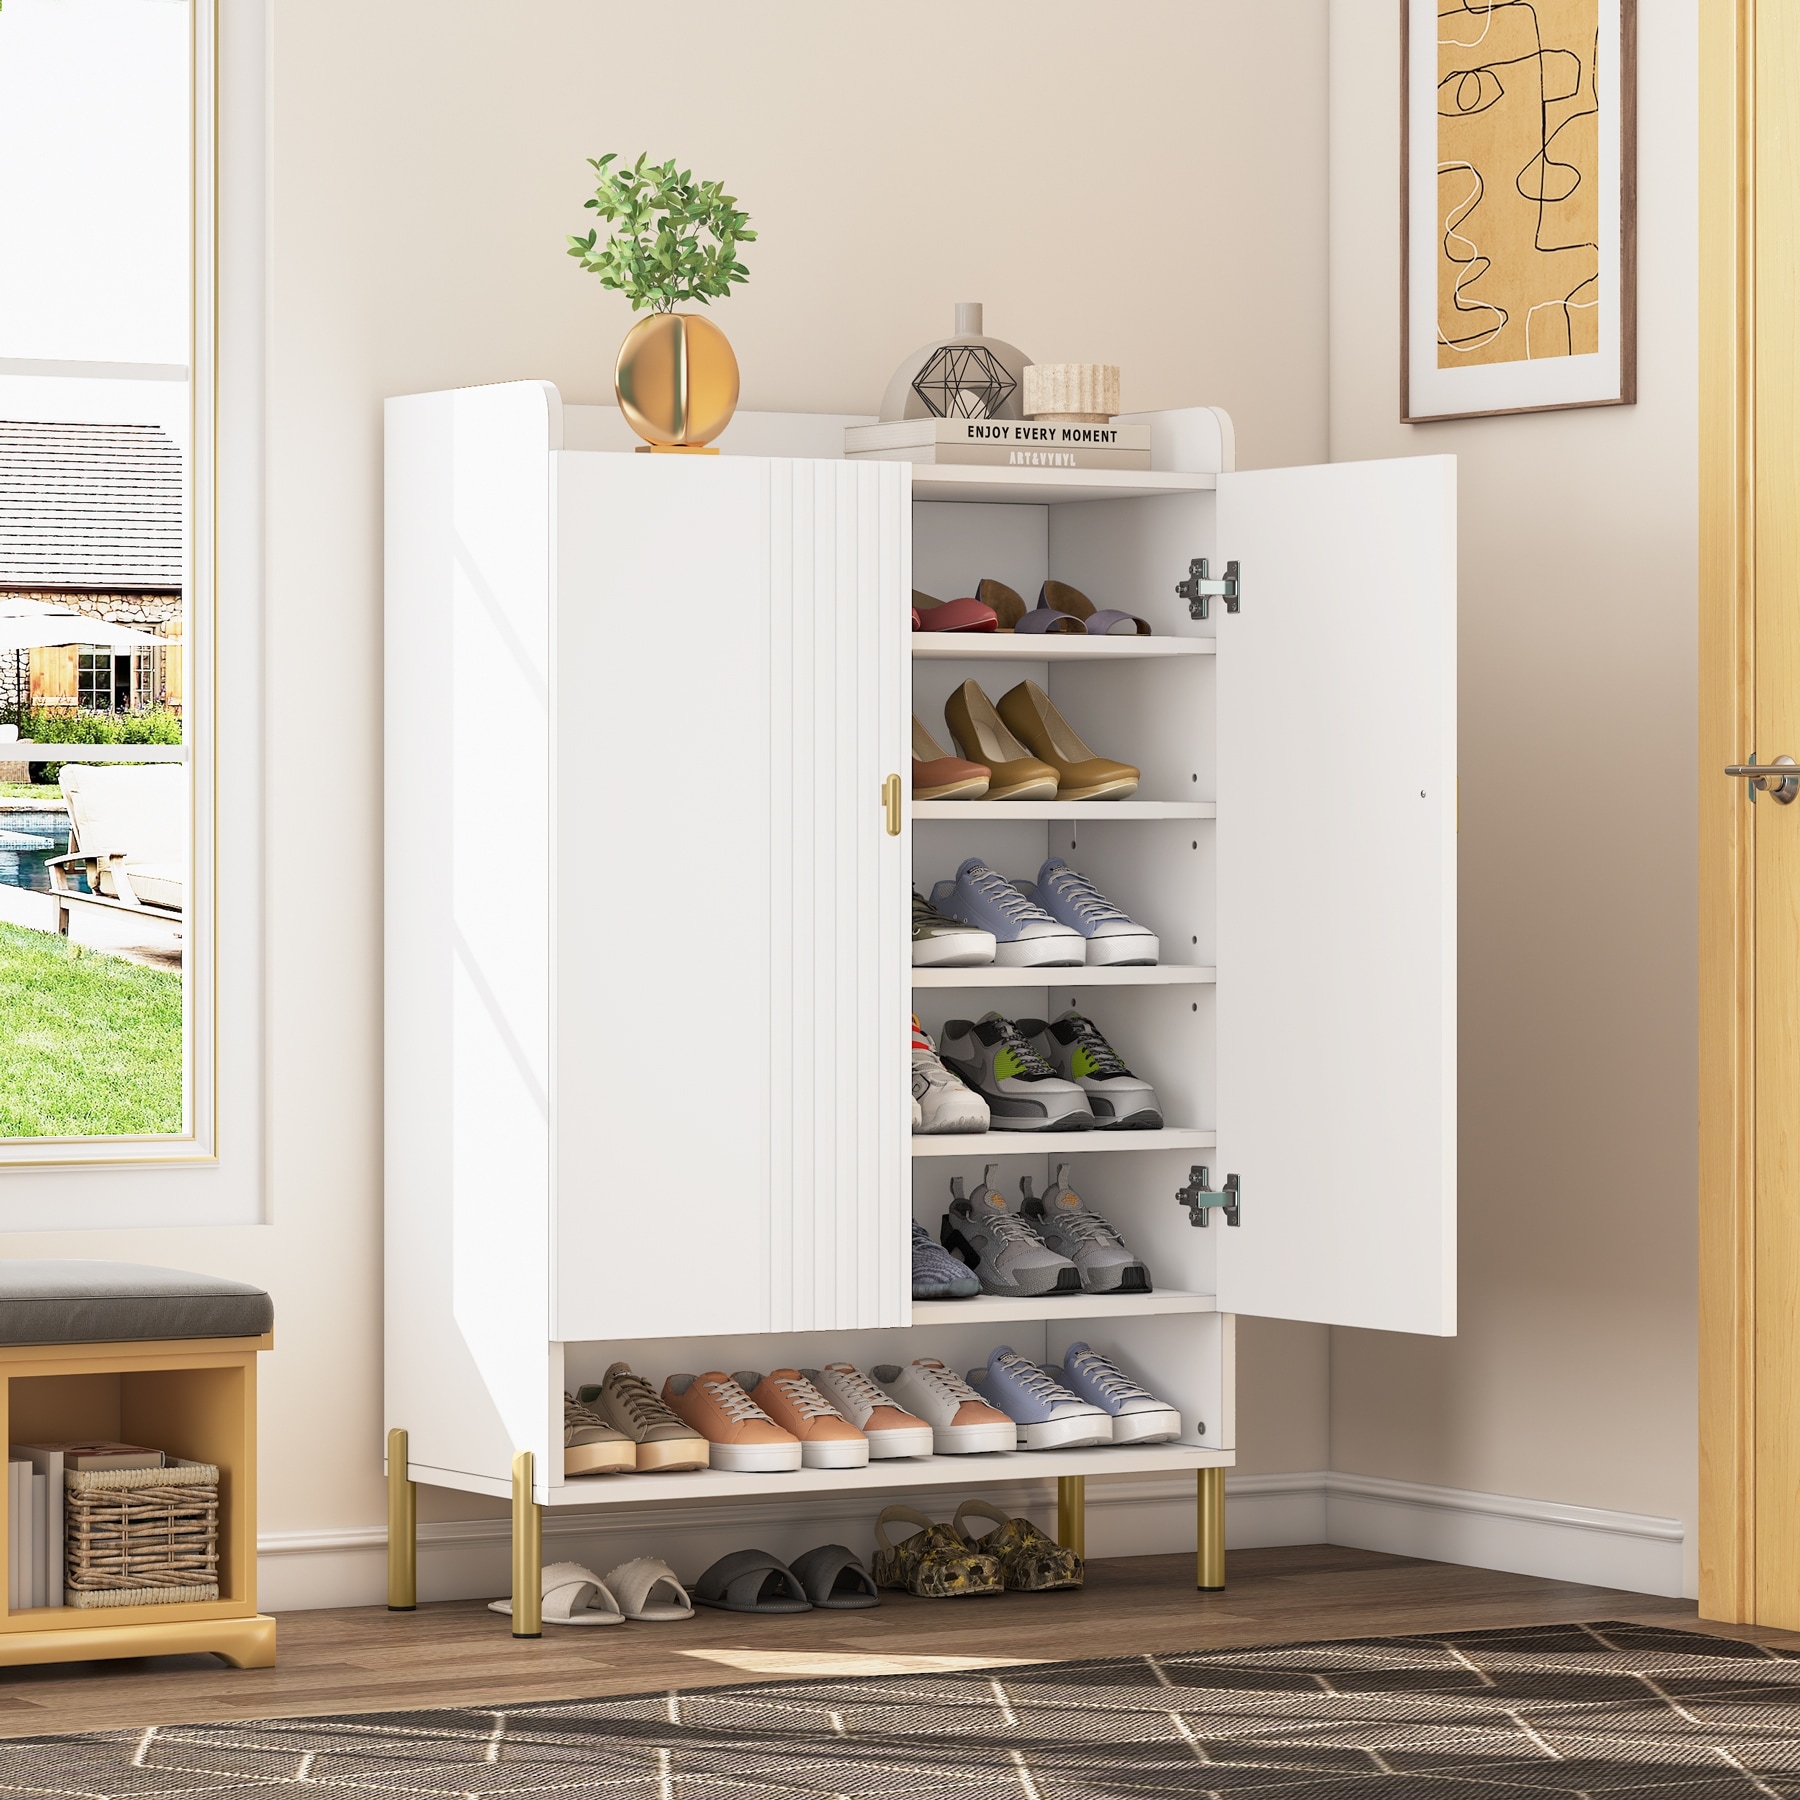 https://ak1.ostkcdn.com/images/products/is/images/direct/8086c1f83306ed25b8dd733990b69f35aa5d3ae9/Shoe-Cabinet-Storage-Entryway%2C-Slim-6-Tier-Shoe-Organizer-Cabinet.jpg